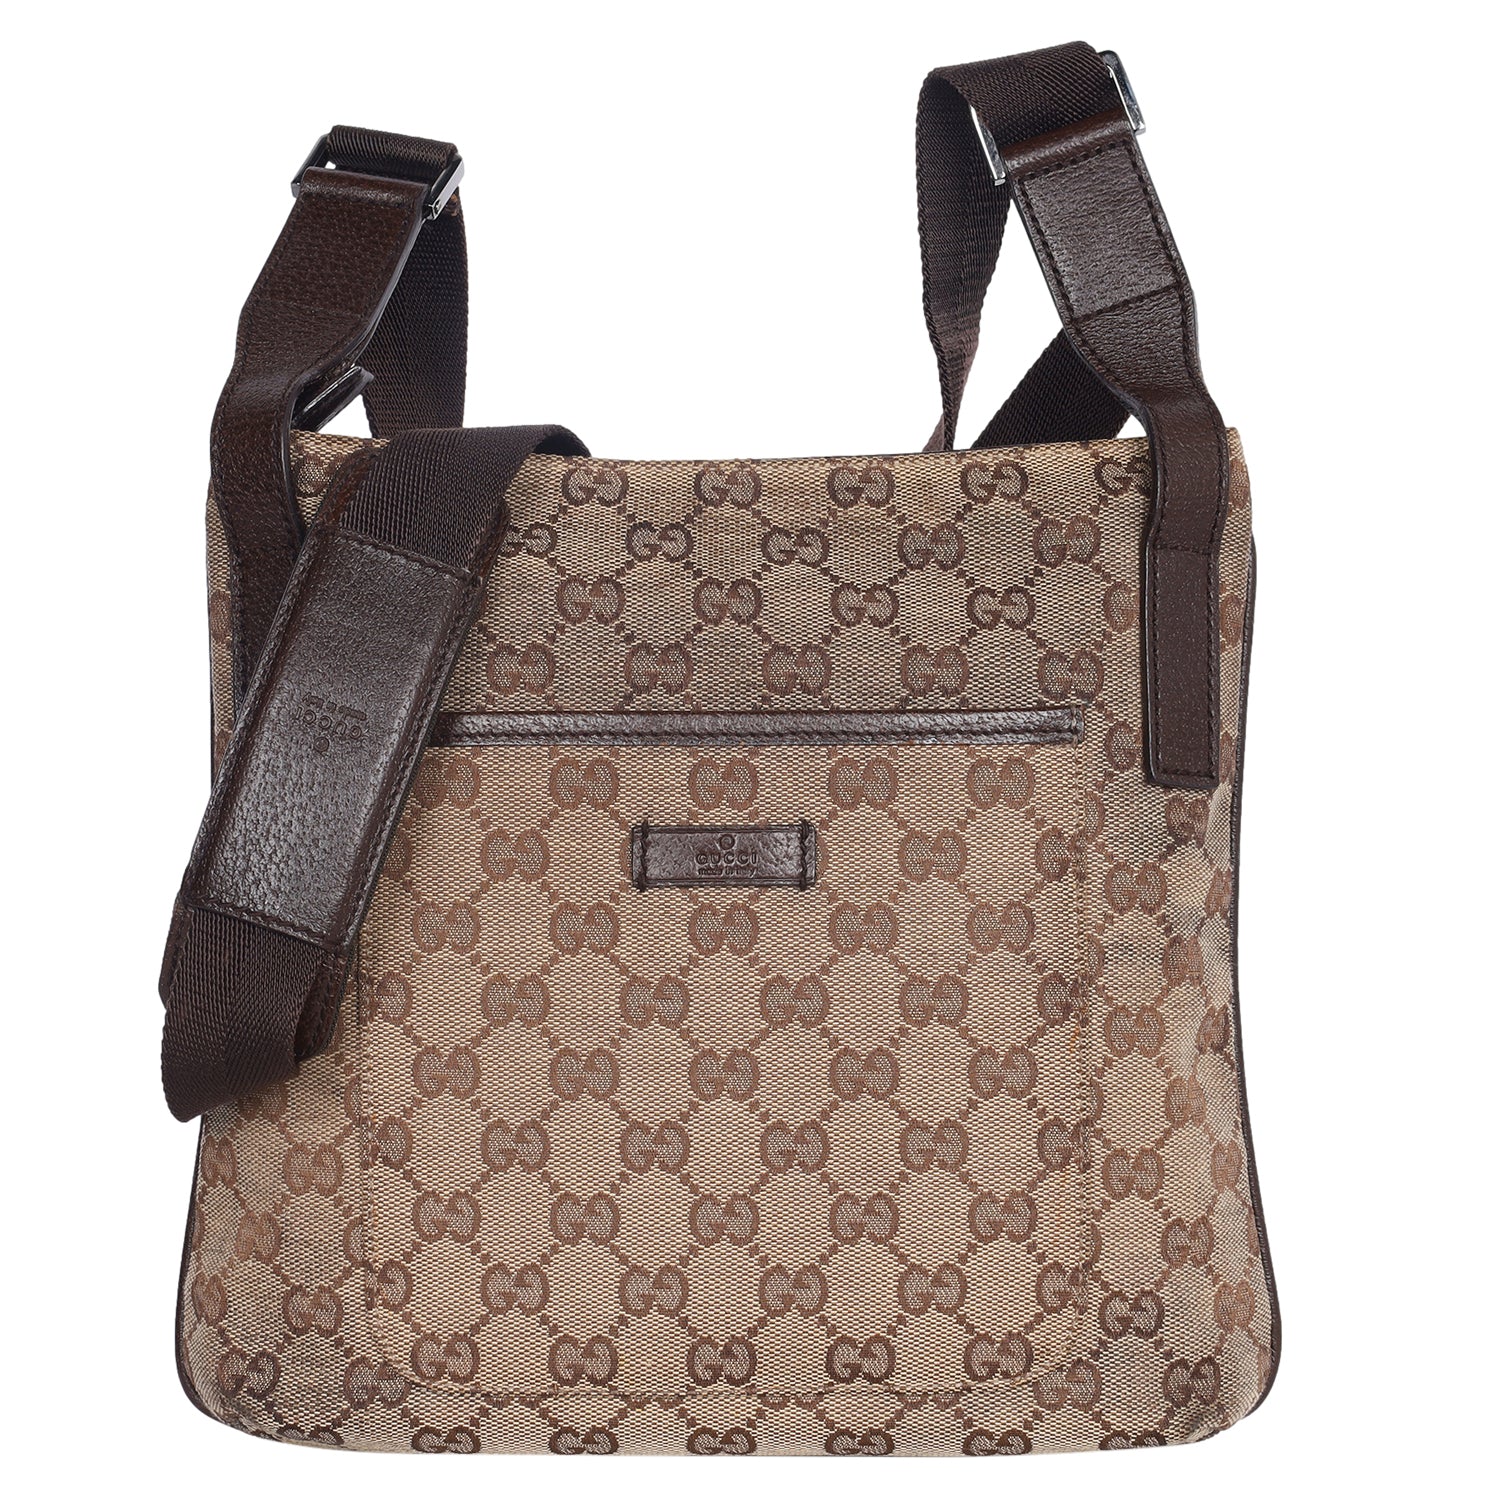 Auth GUCCI Shoulder Bag Beige Brown GG Canvas Leather 122793 Used